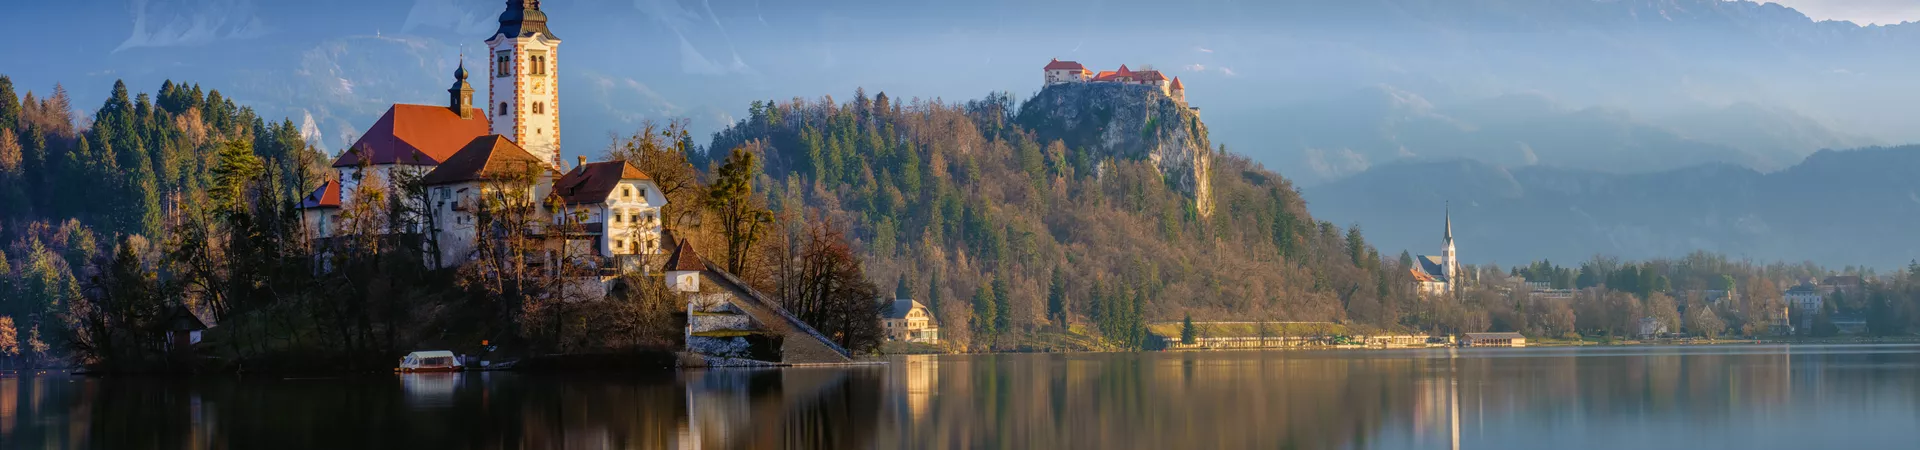 Evening On The Lake Bled 1140962616